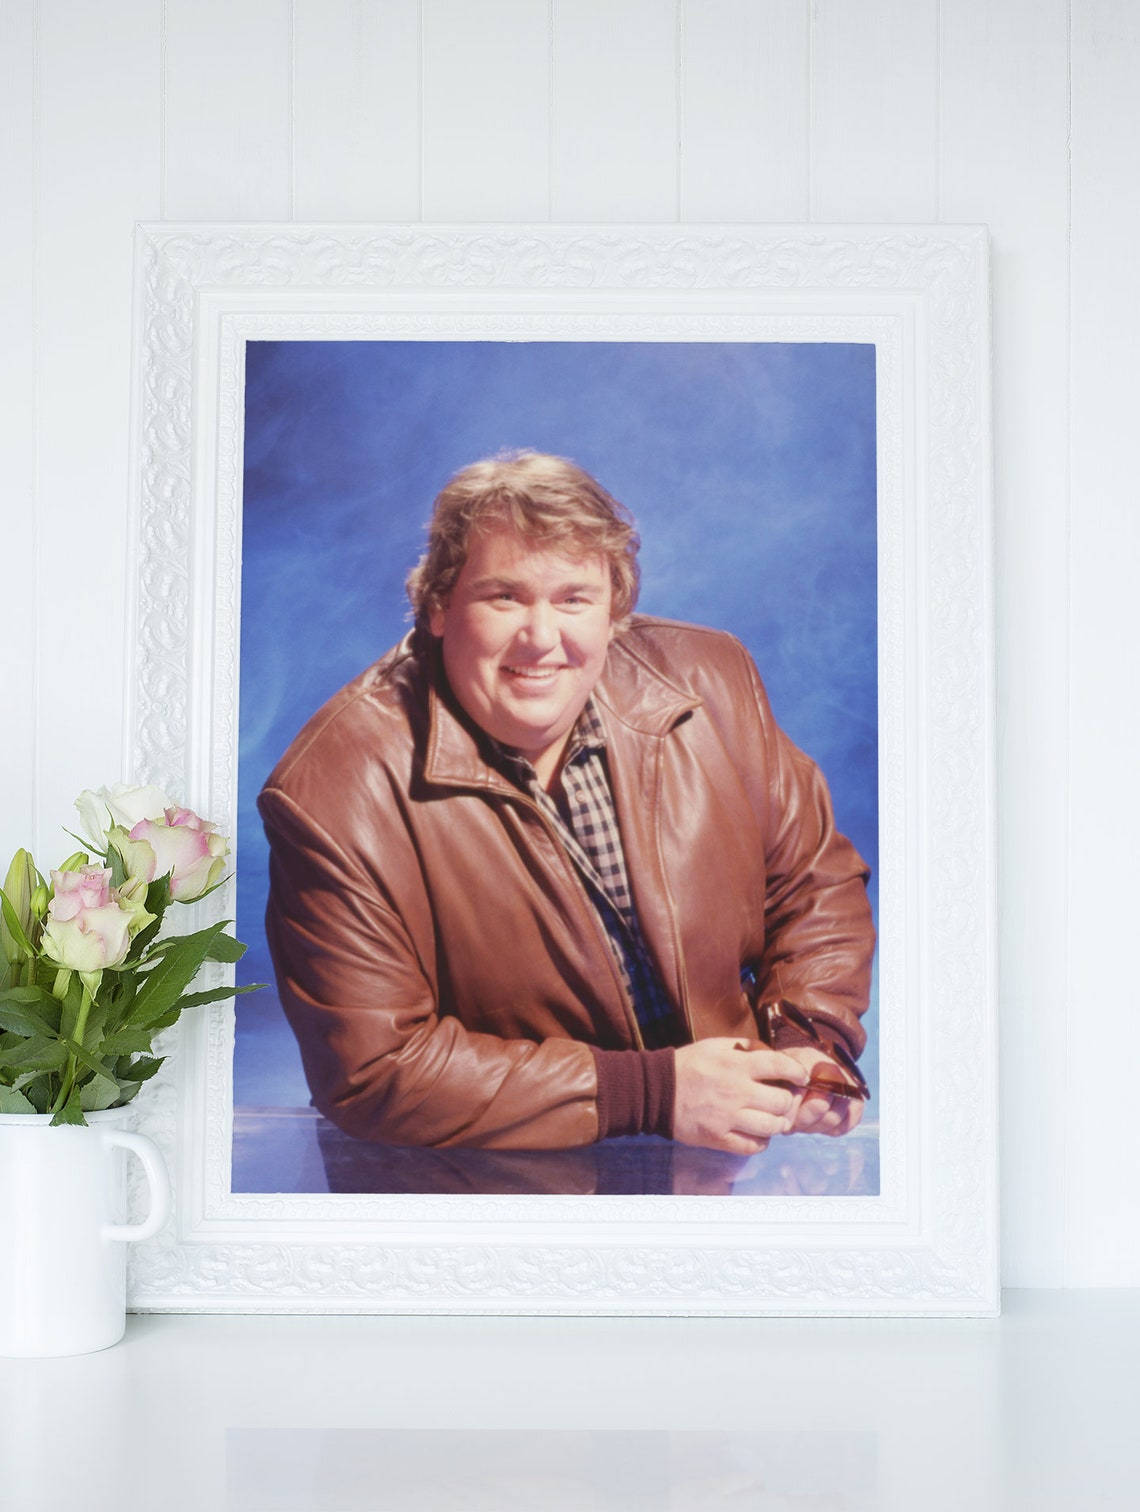 Outstanding Comedian John Candy In Frame